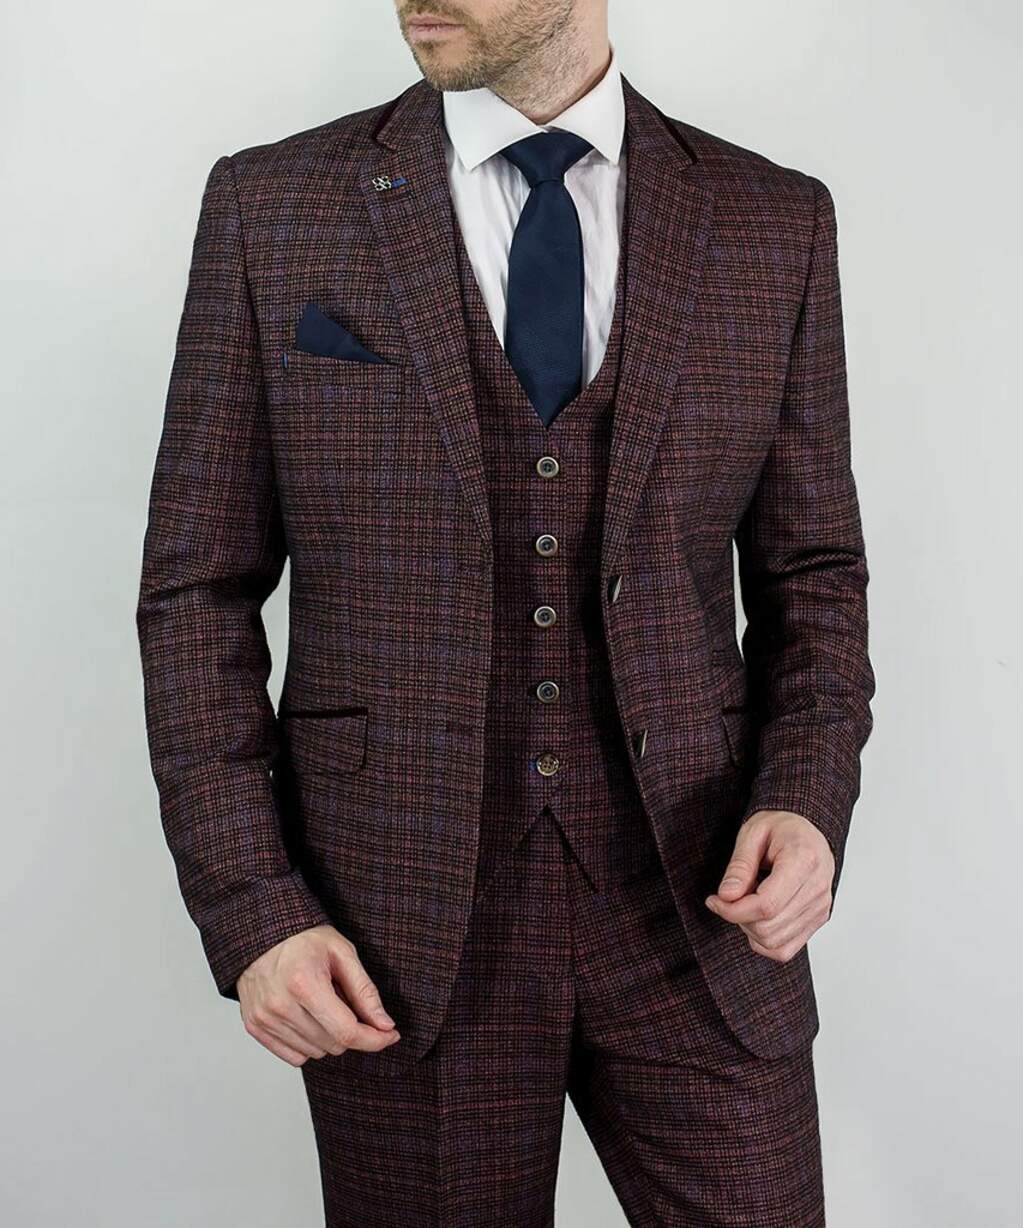 Tweed Suit 3 Piece for sale in UK | View 63 bargains